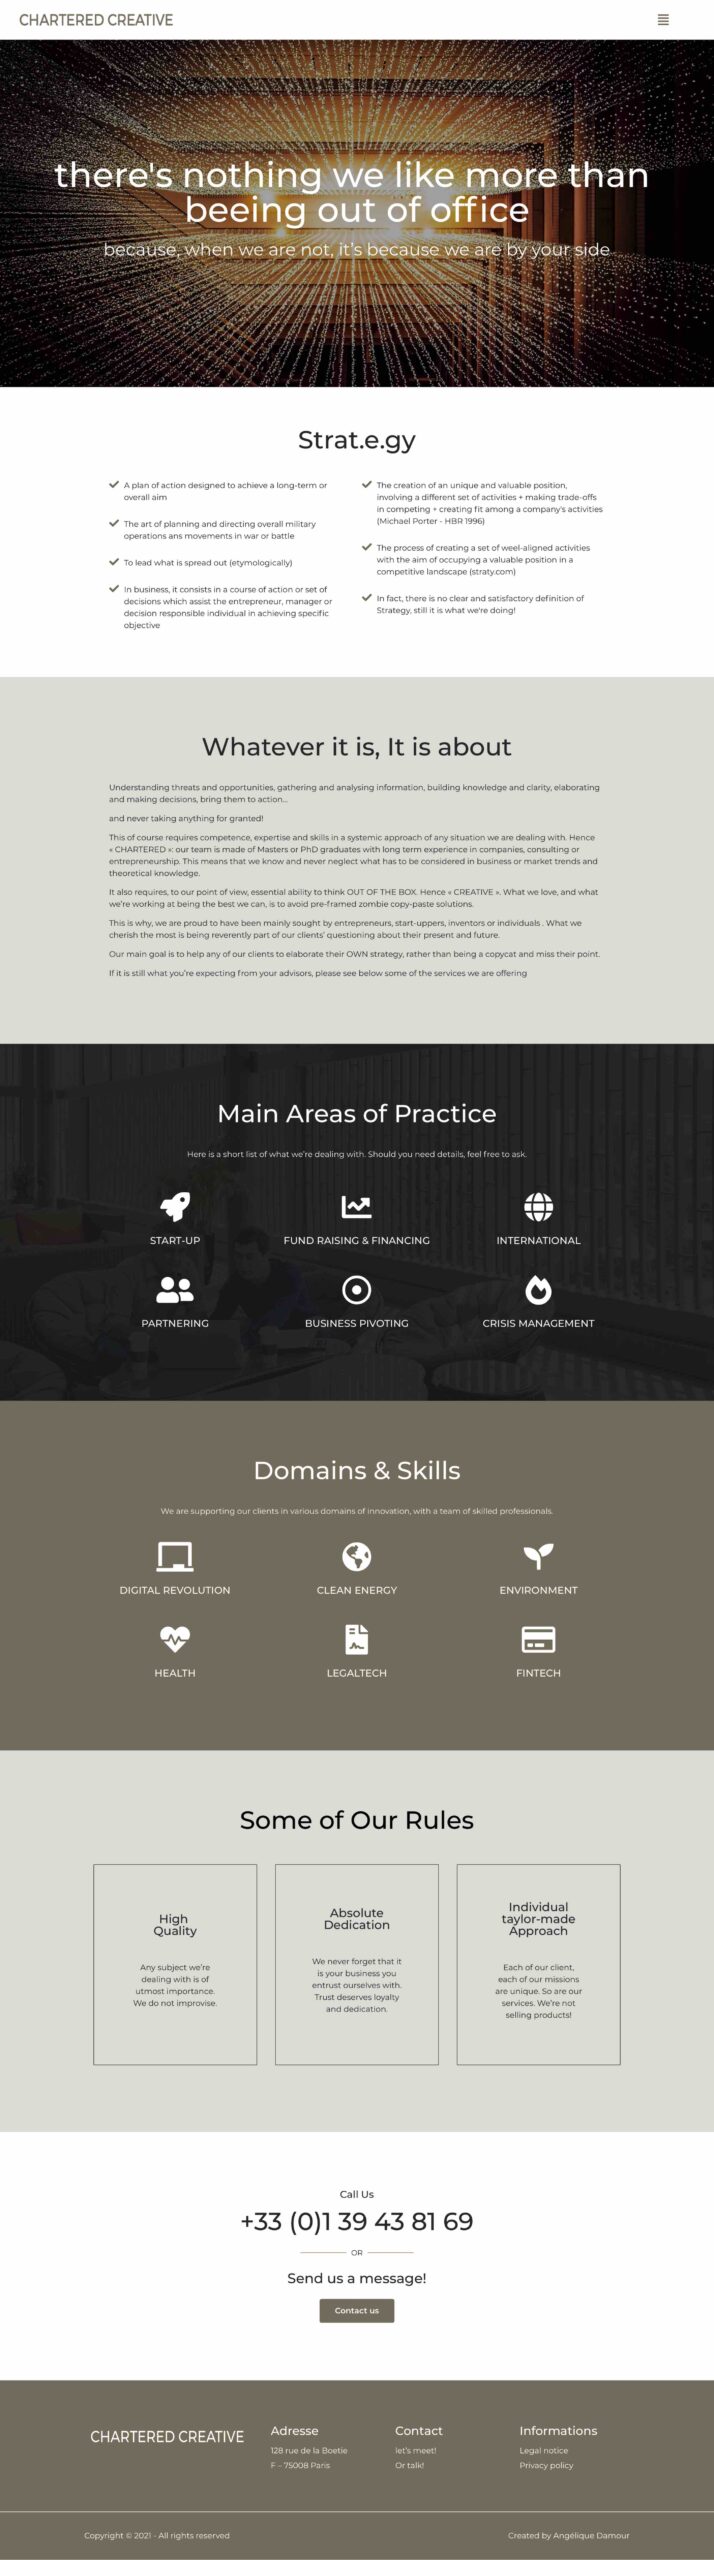 ANGELIQUE DAMOUR - projet CHARTERED CREATIVE - home page full